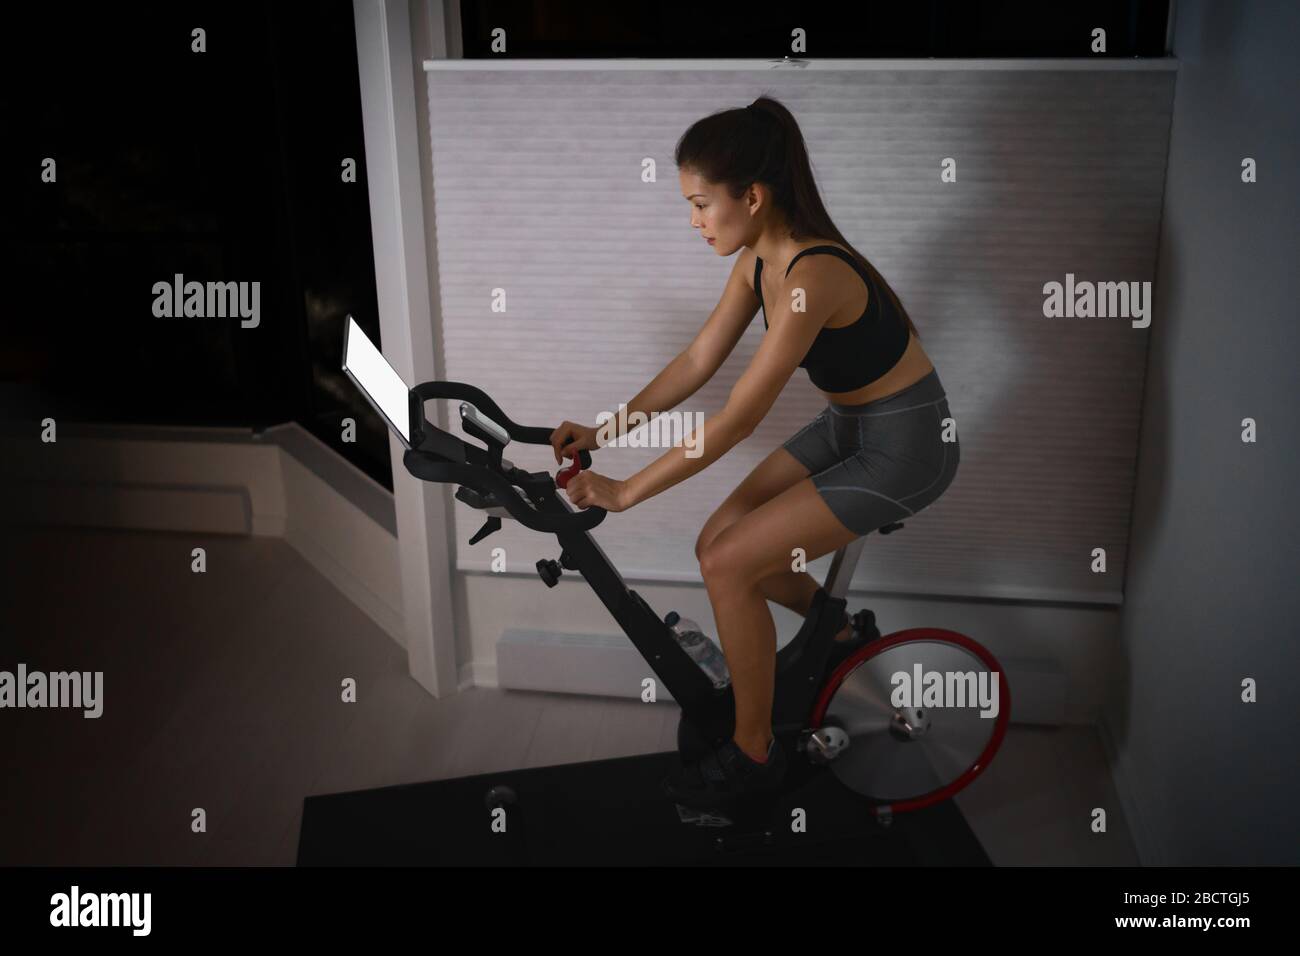 Home workout indoor stationary bike Asian girl biking screen with online classes woman training on smart fitness equipment indoors for cycling exercise. Late at night in bedroom. Stock Photo